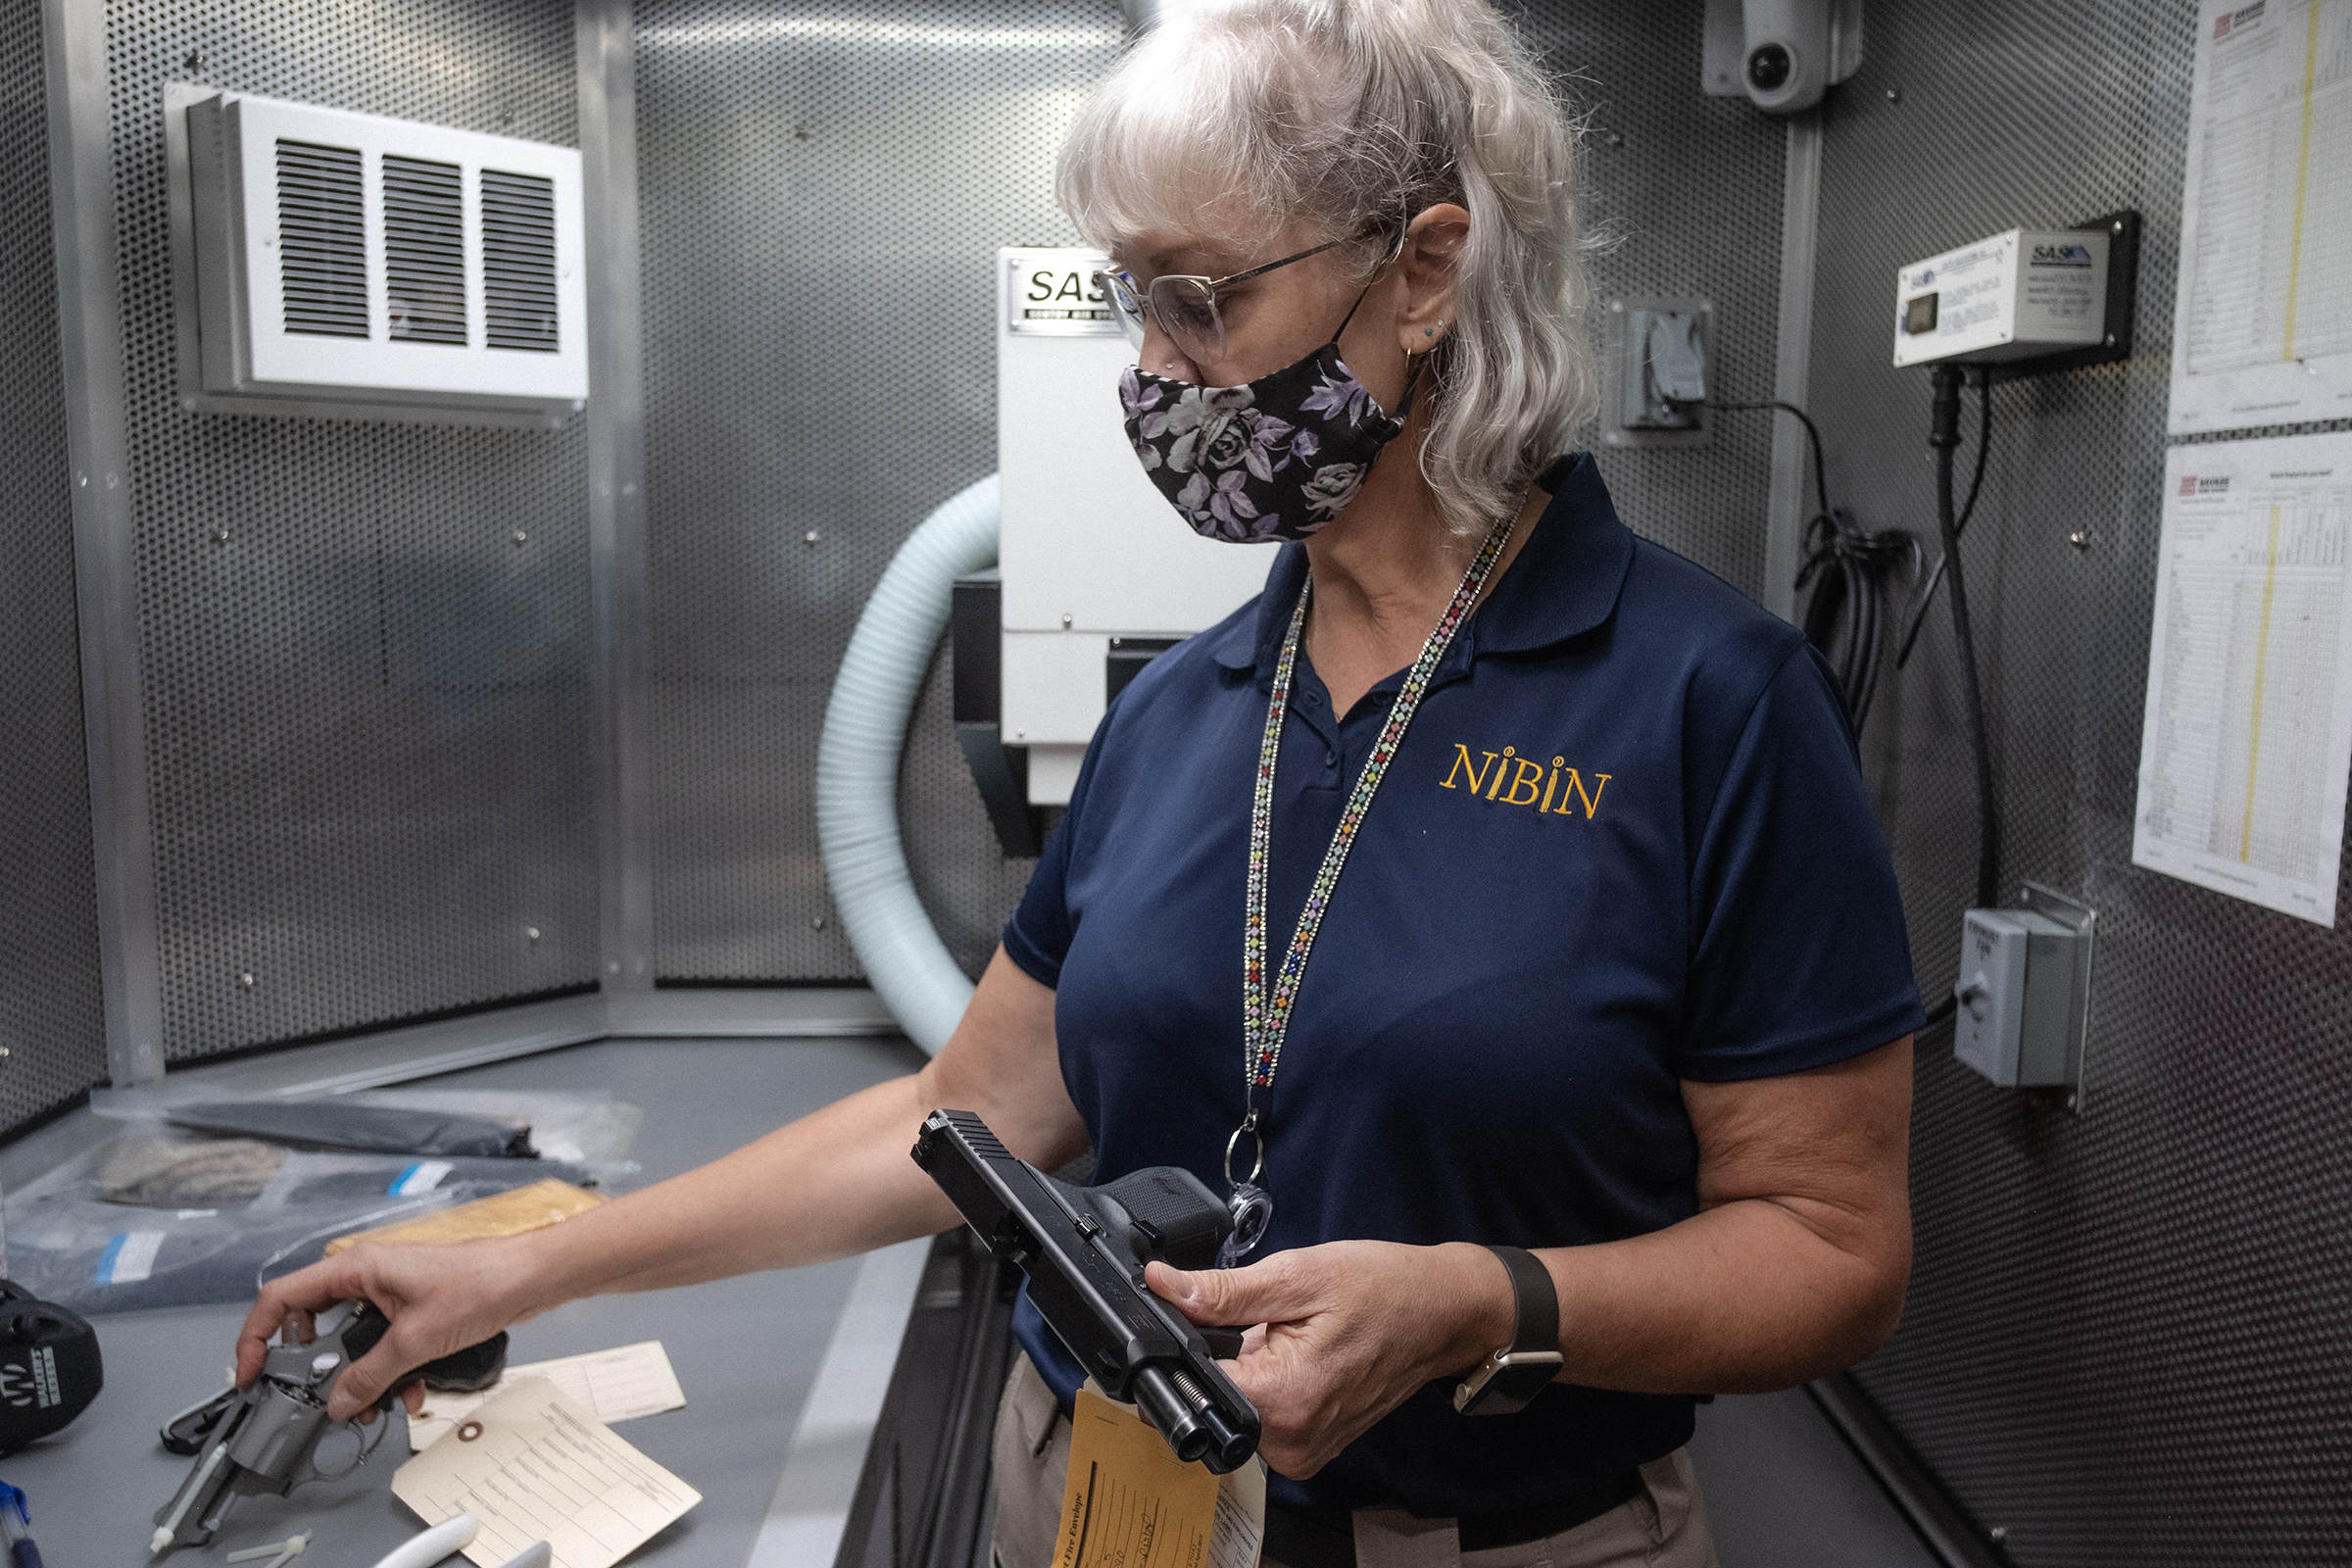 ATF technician Jill Jacobson is a member of a team of specialists sent to Chicago as part of the Operation Legend task force